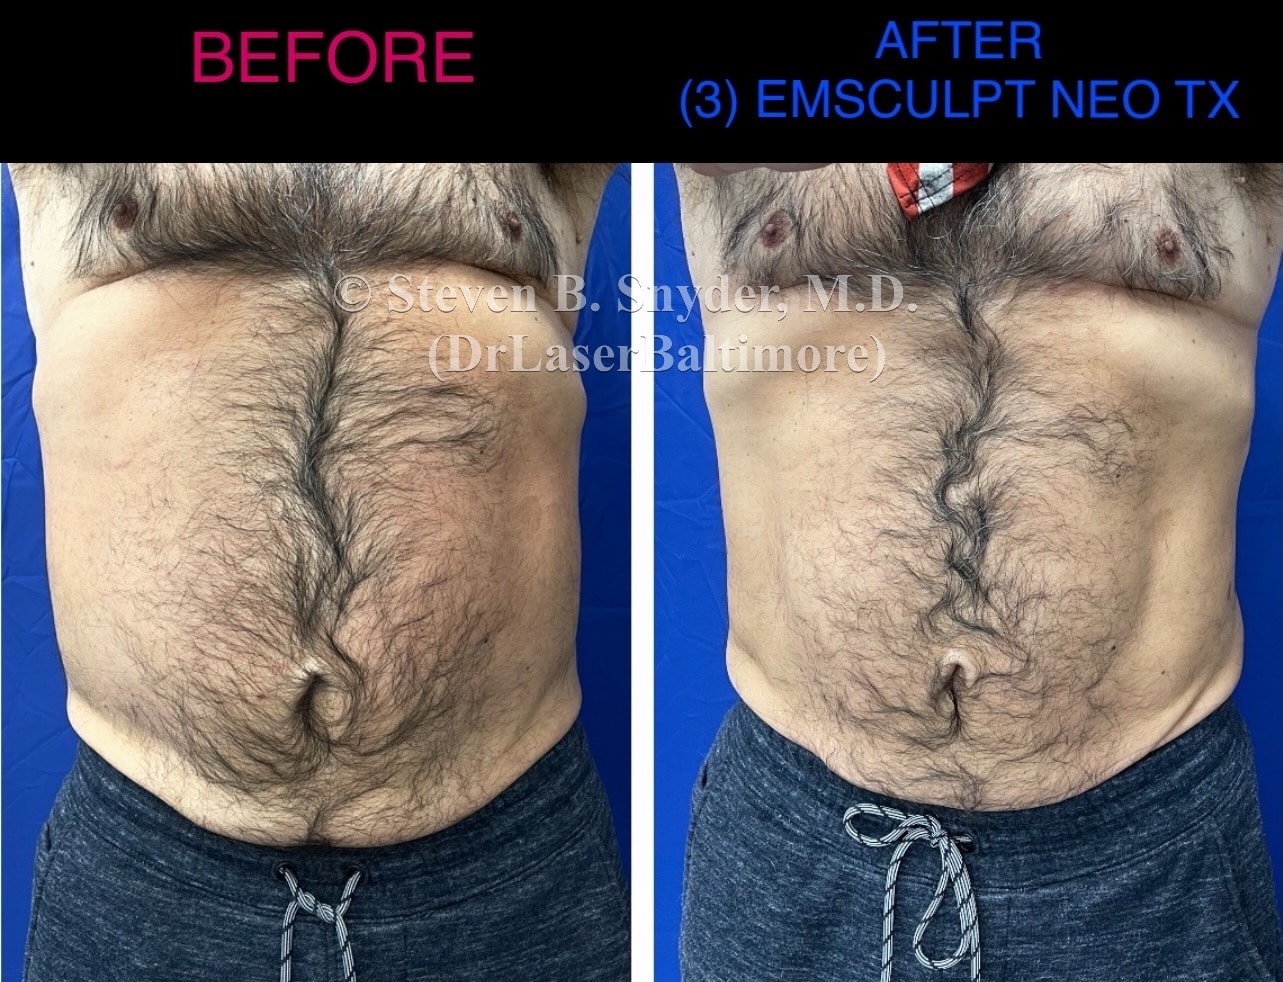 Emsculpt neo abs treatment before and after